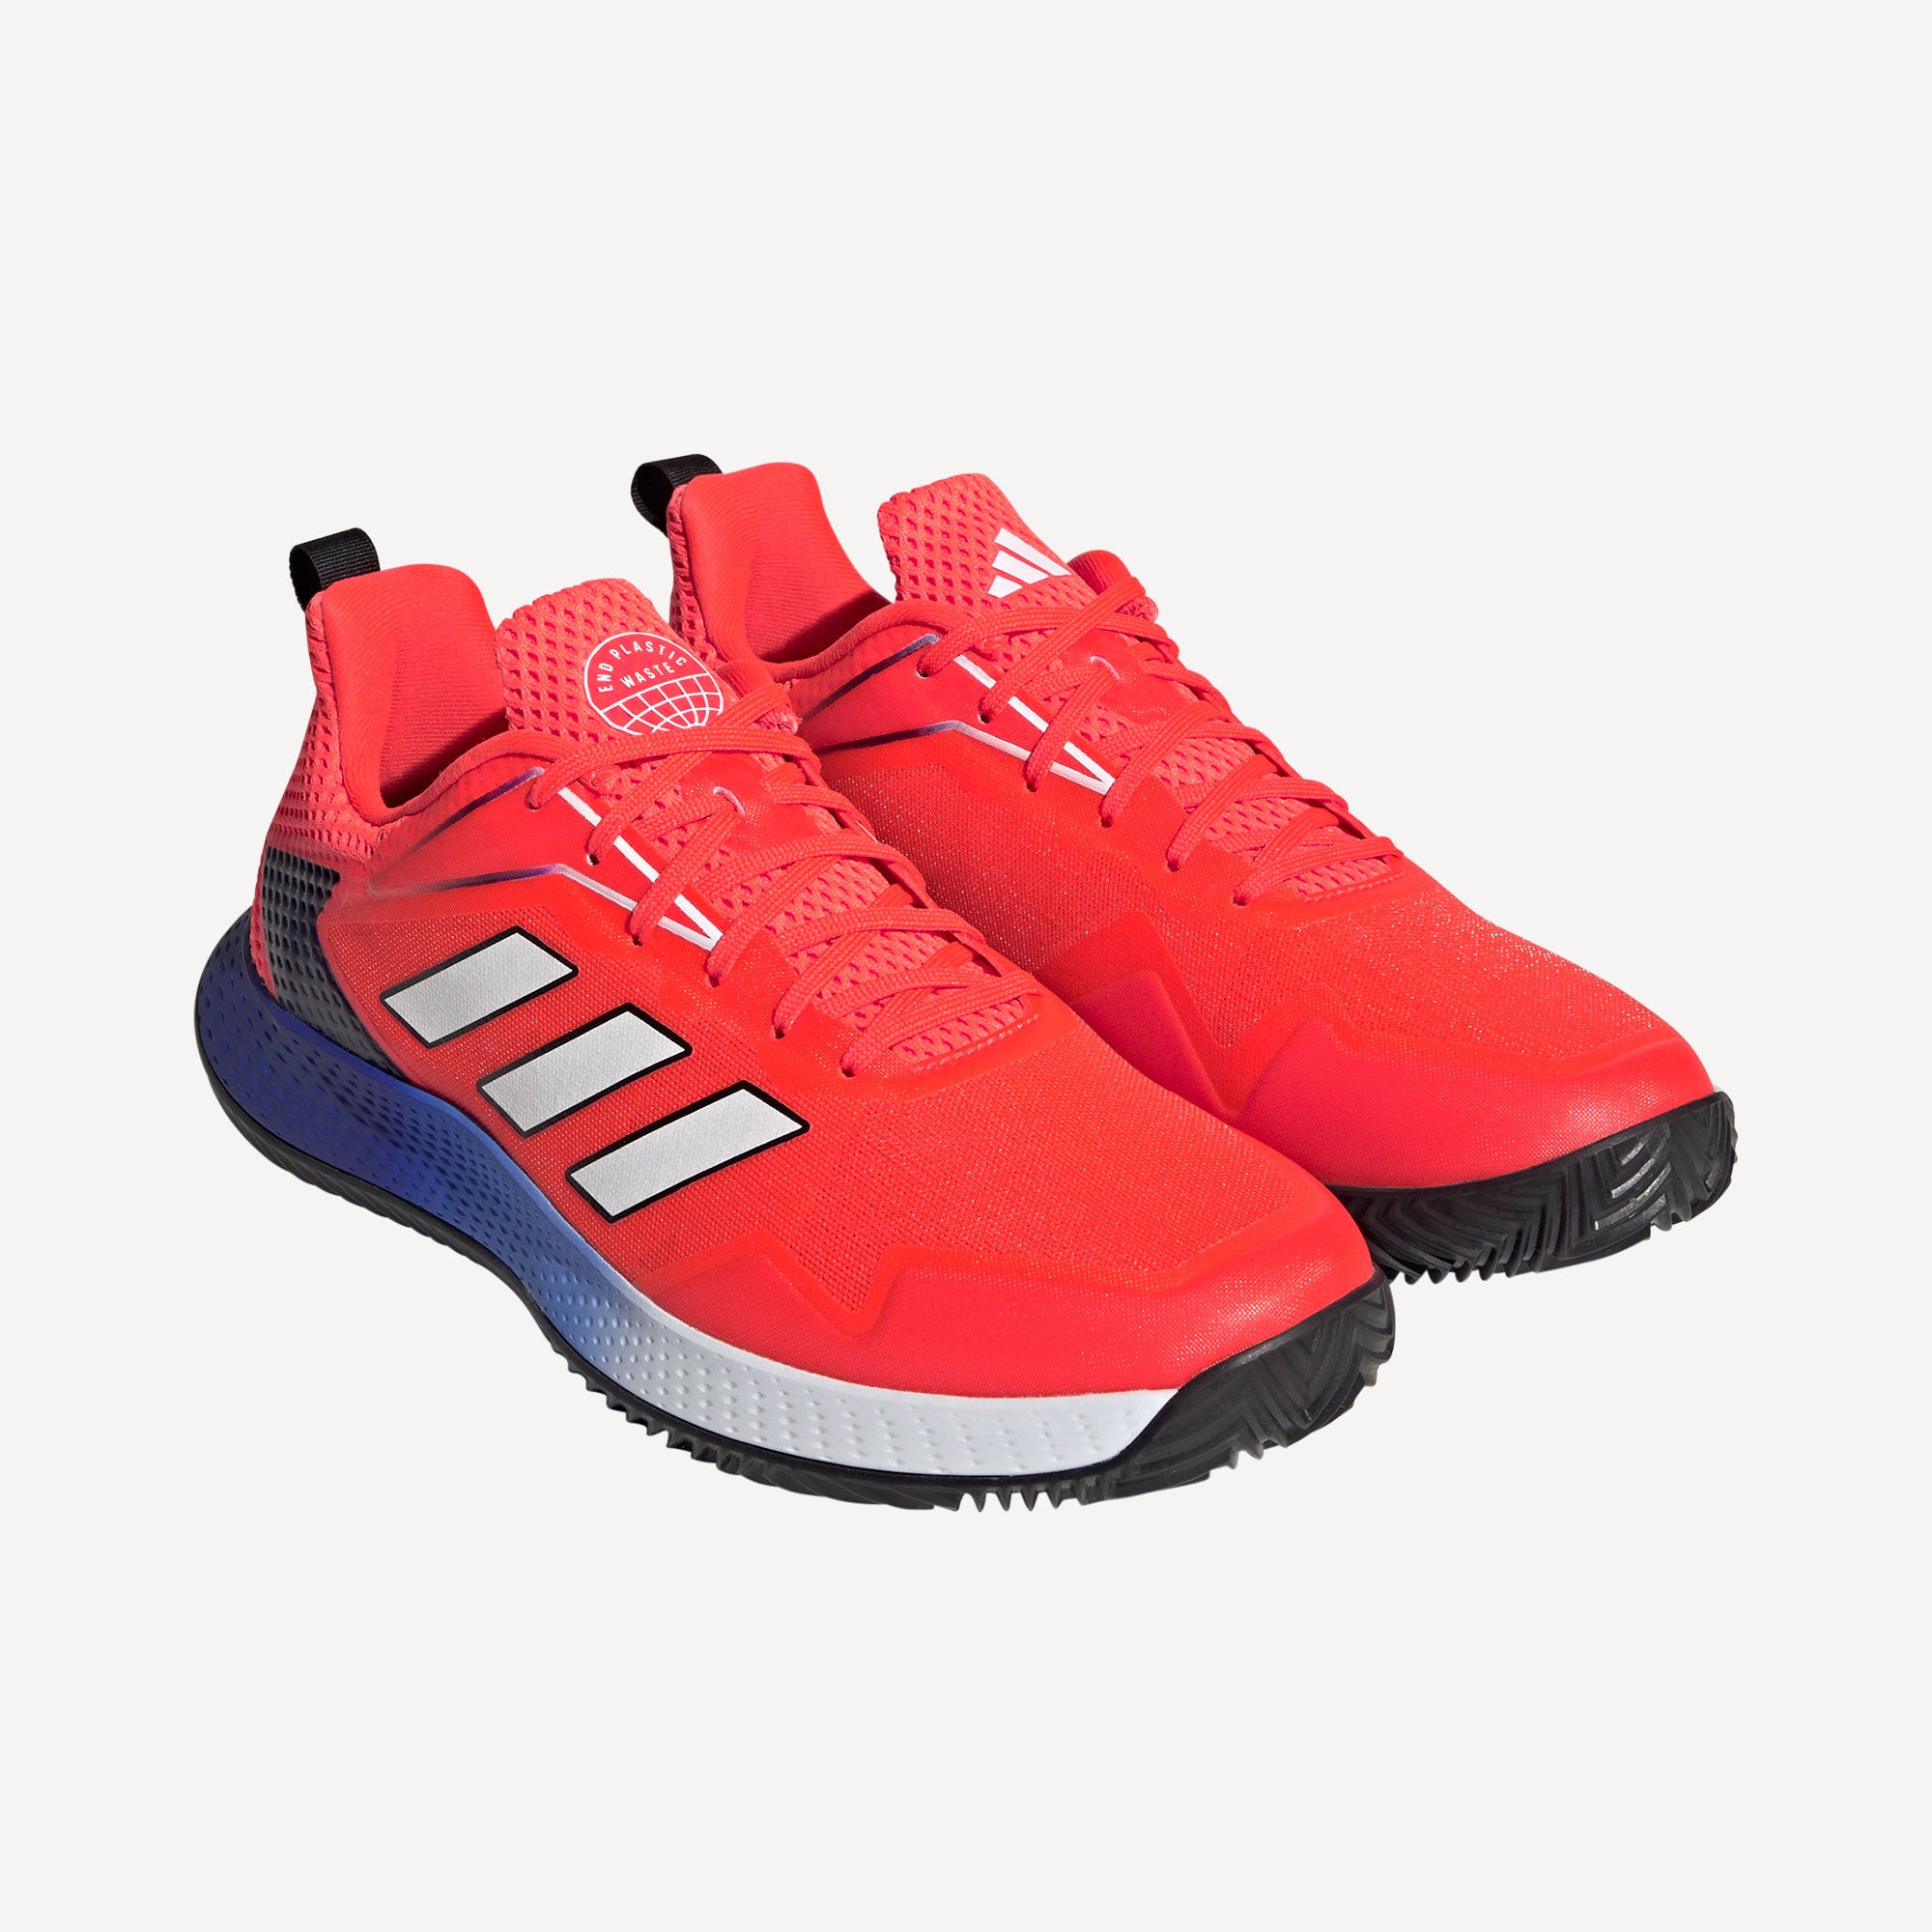 adidas Defiant Speed Men's Clay Court Tennis Shoes Red (5)